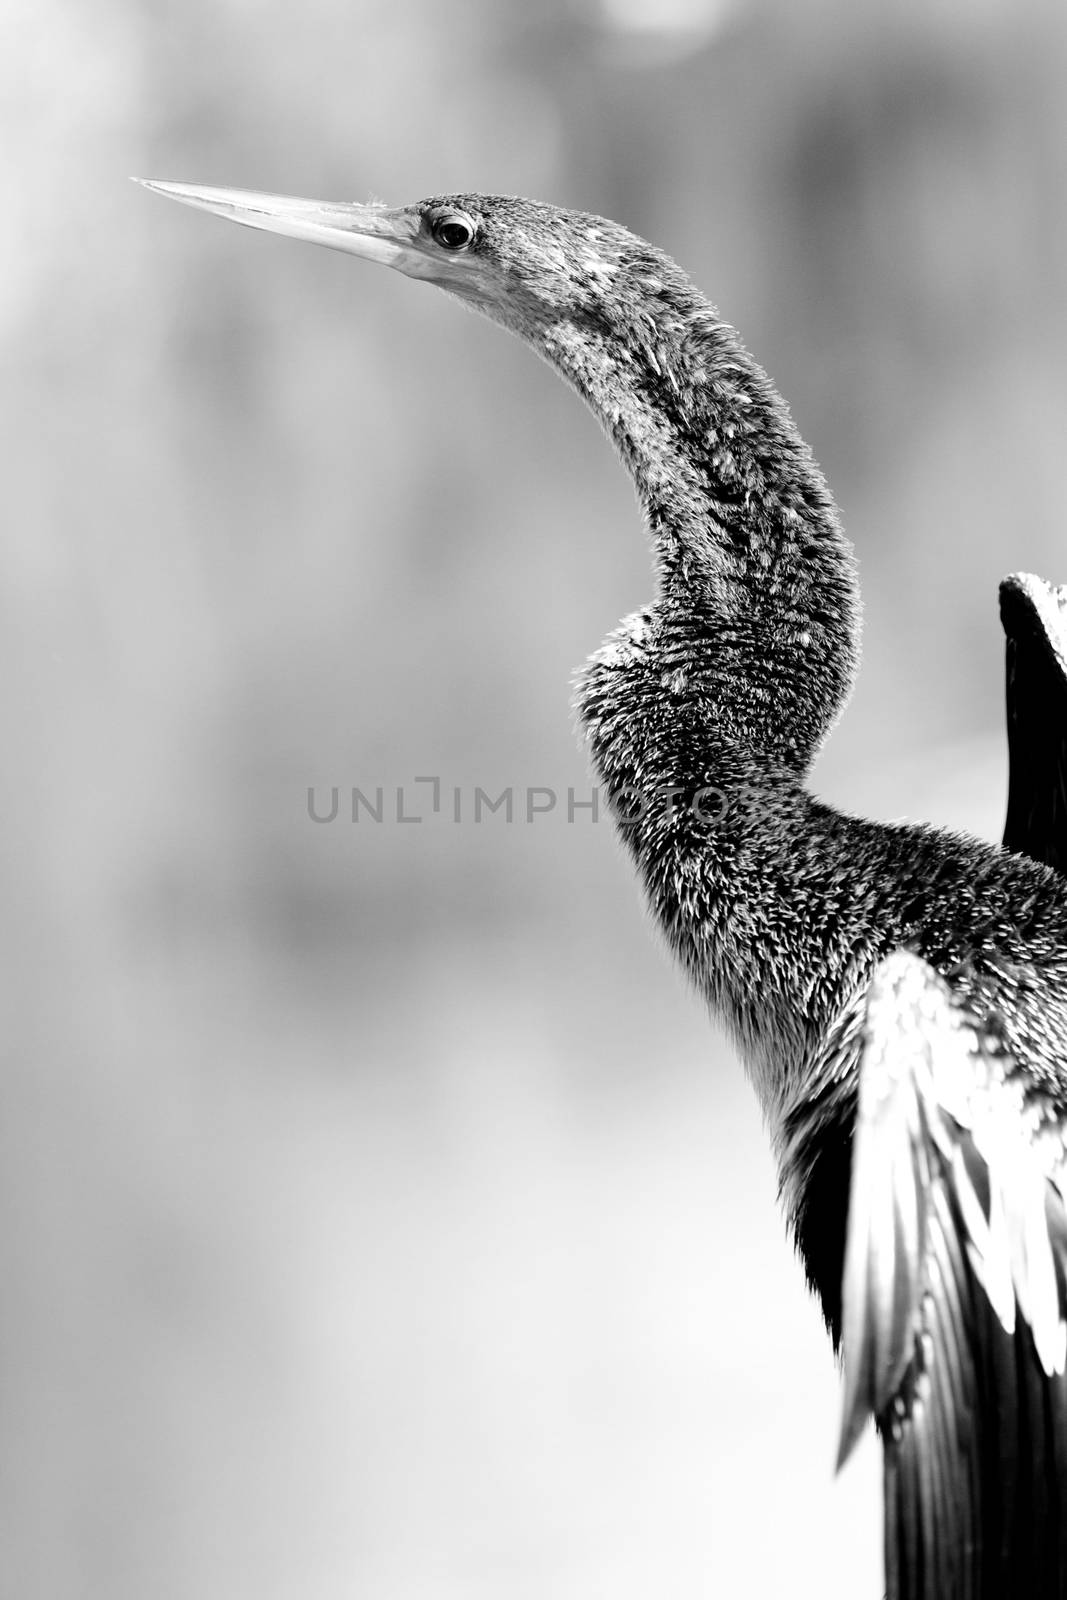 Black and white portrait of bird with long neck.